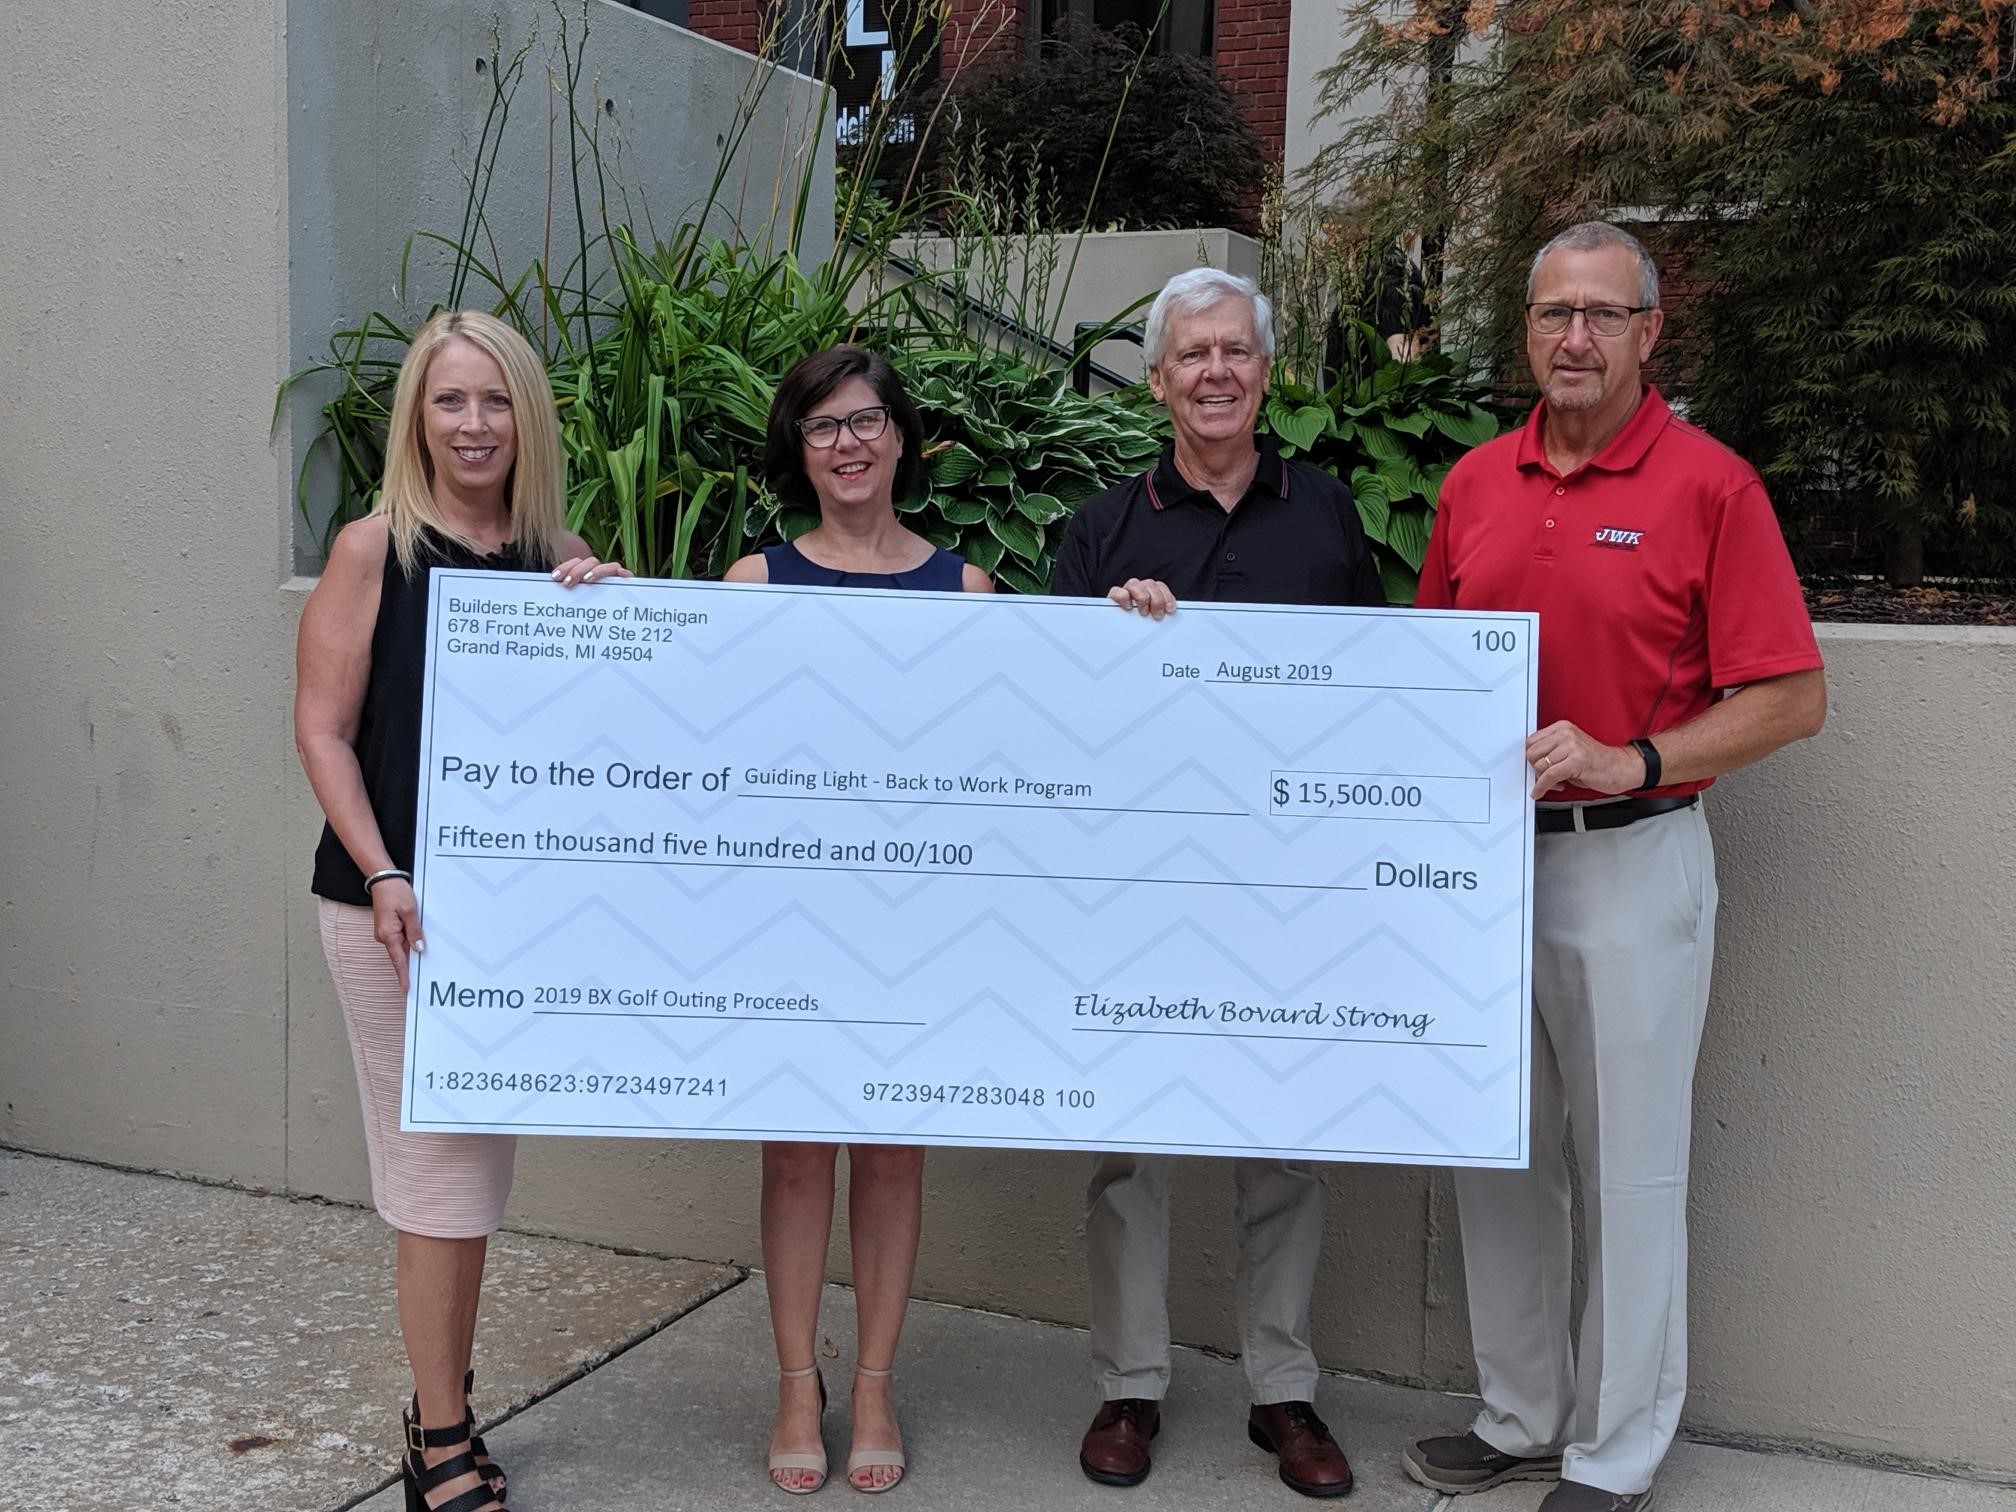 63rd Annual Golf Outing Check Presentation